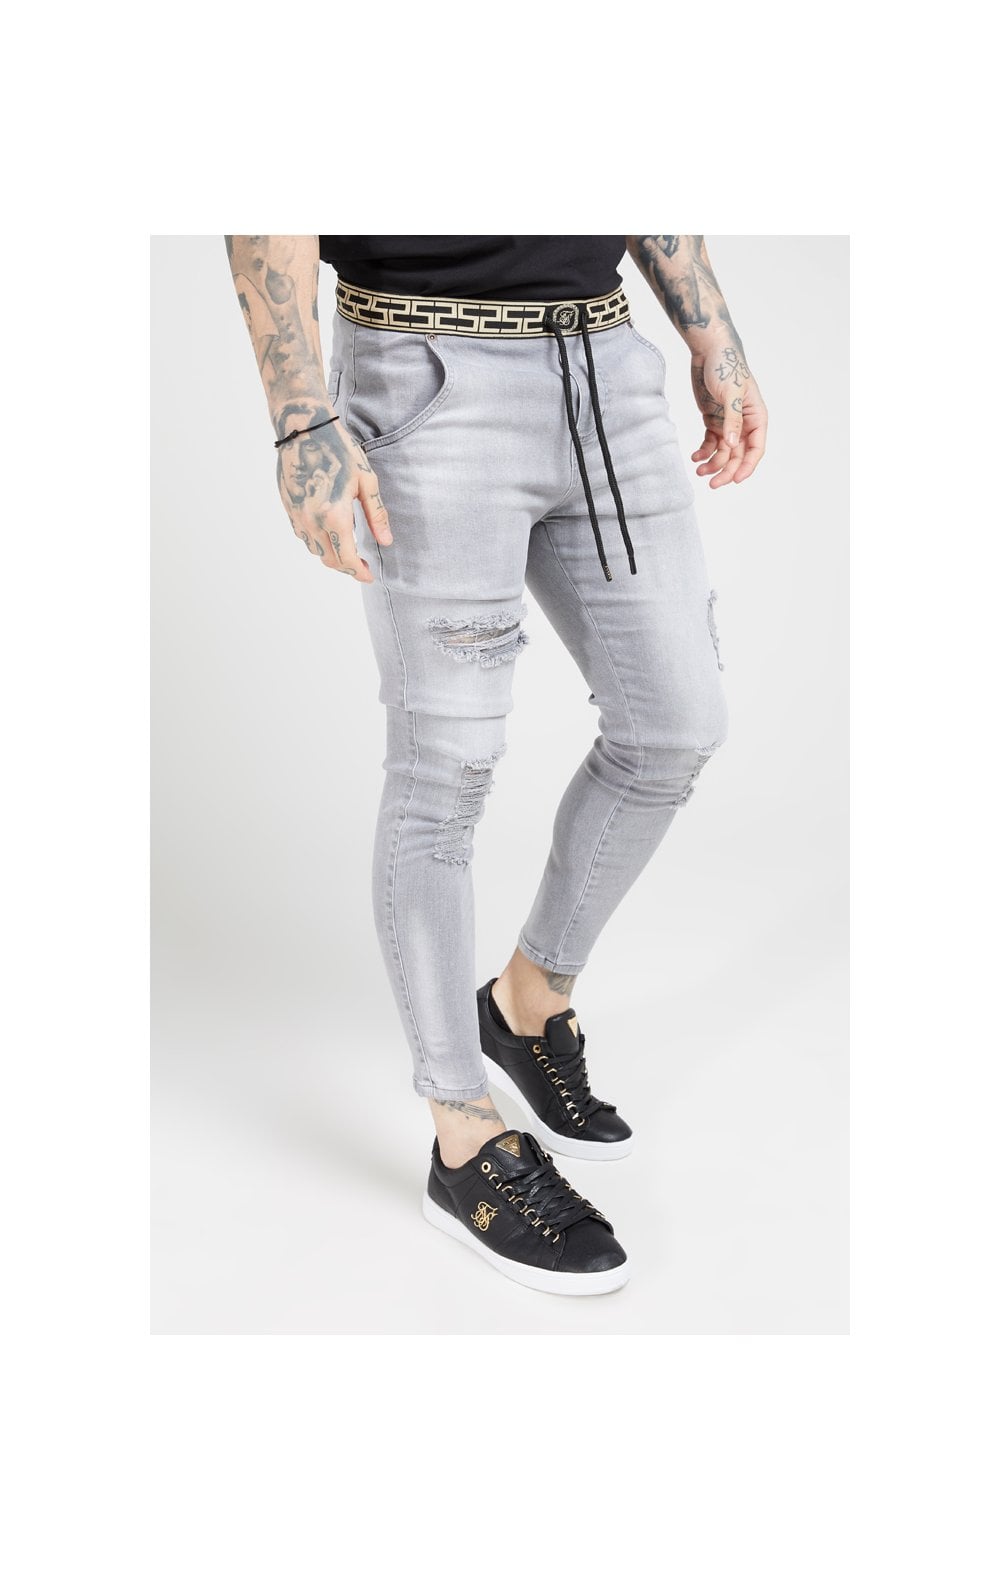 Load image into Gallery viewer, SikSilk Elasticated Waist Skinny Distressed Jeans – Washed Grey